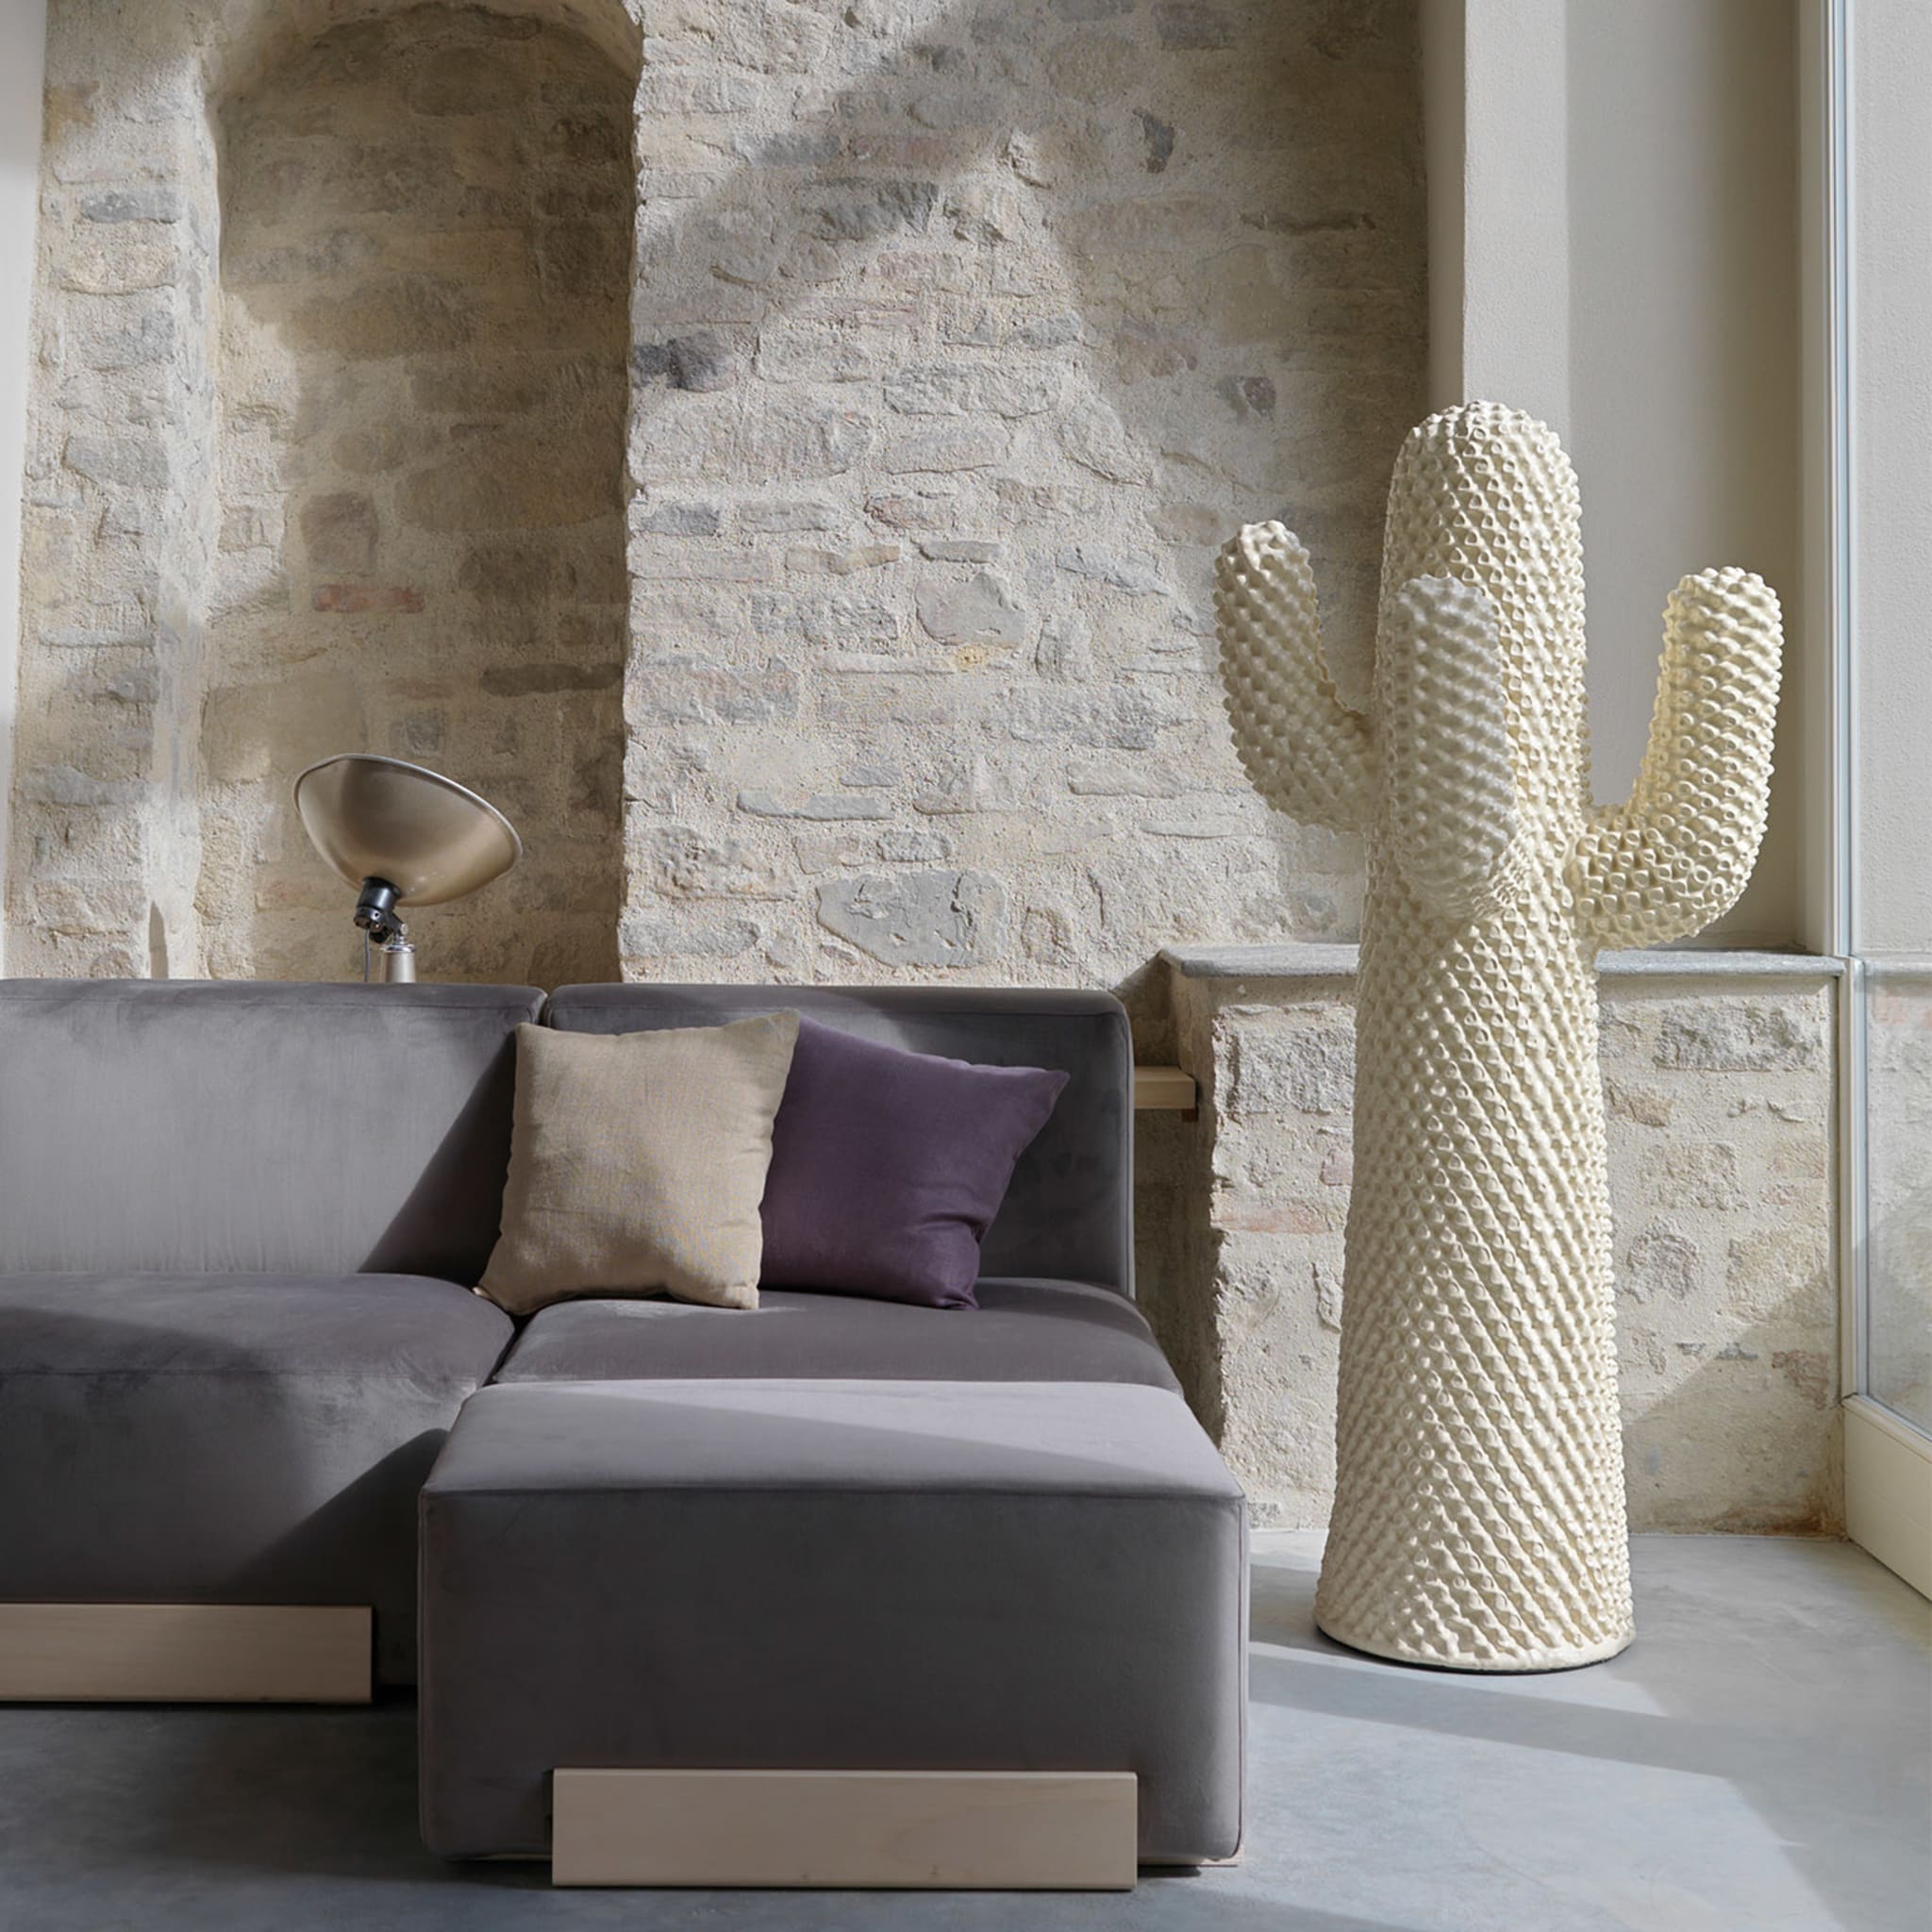 Another White Cactus Coat Stand by Drocco/Mello - Alternative view 3